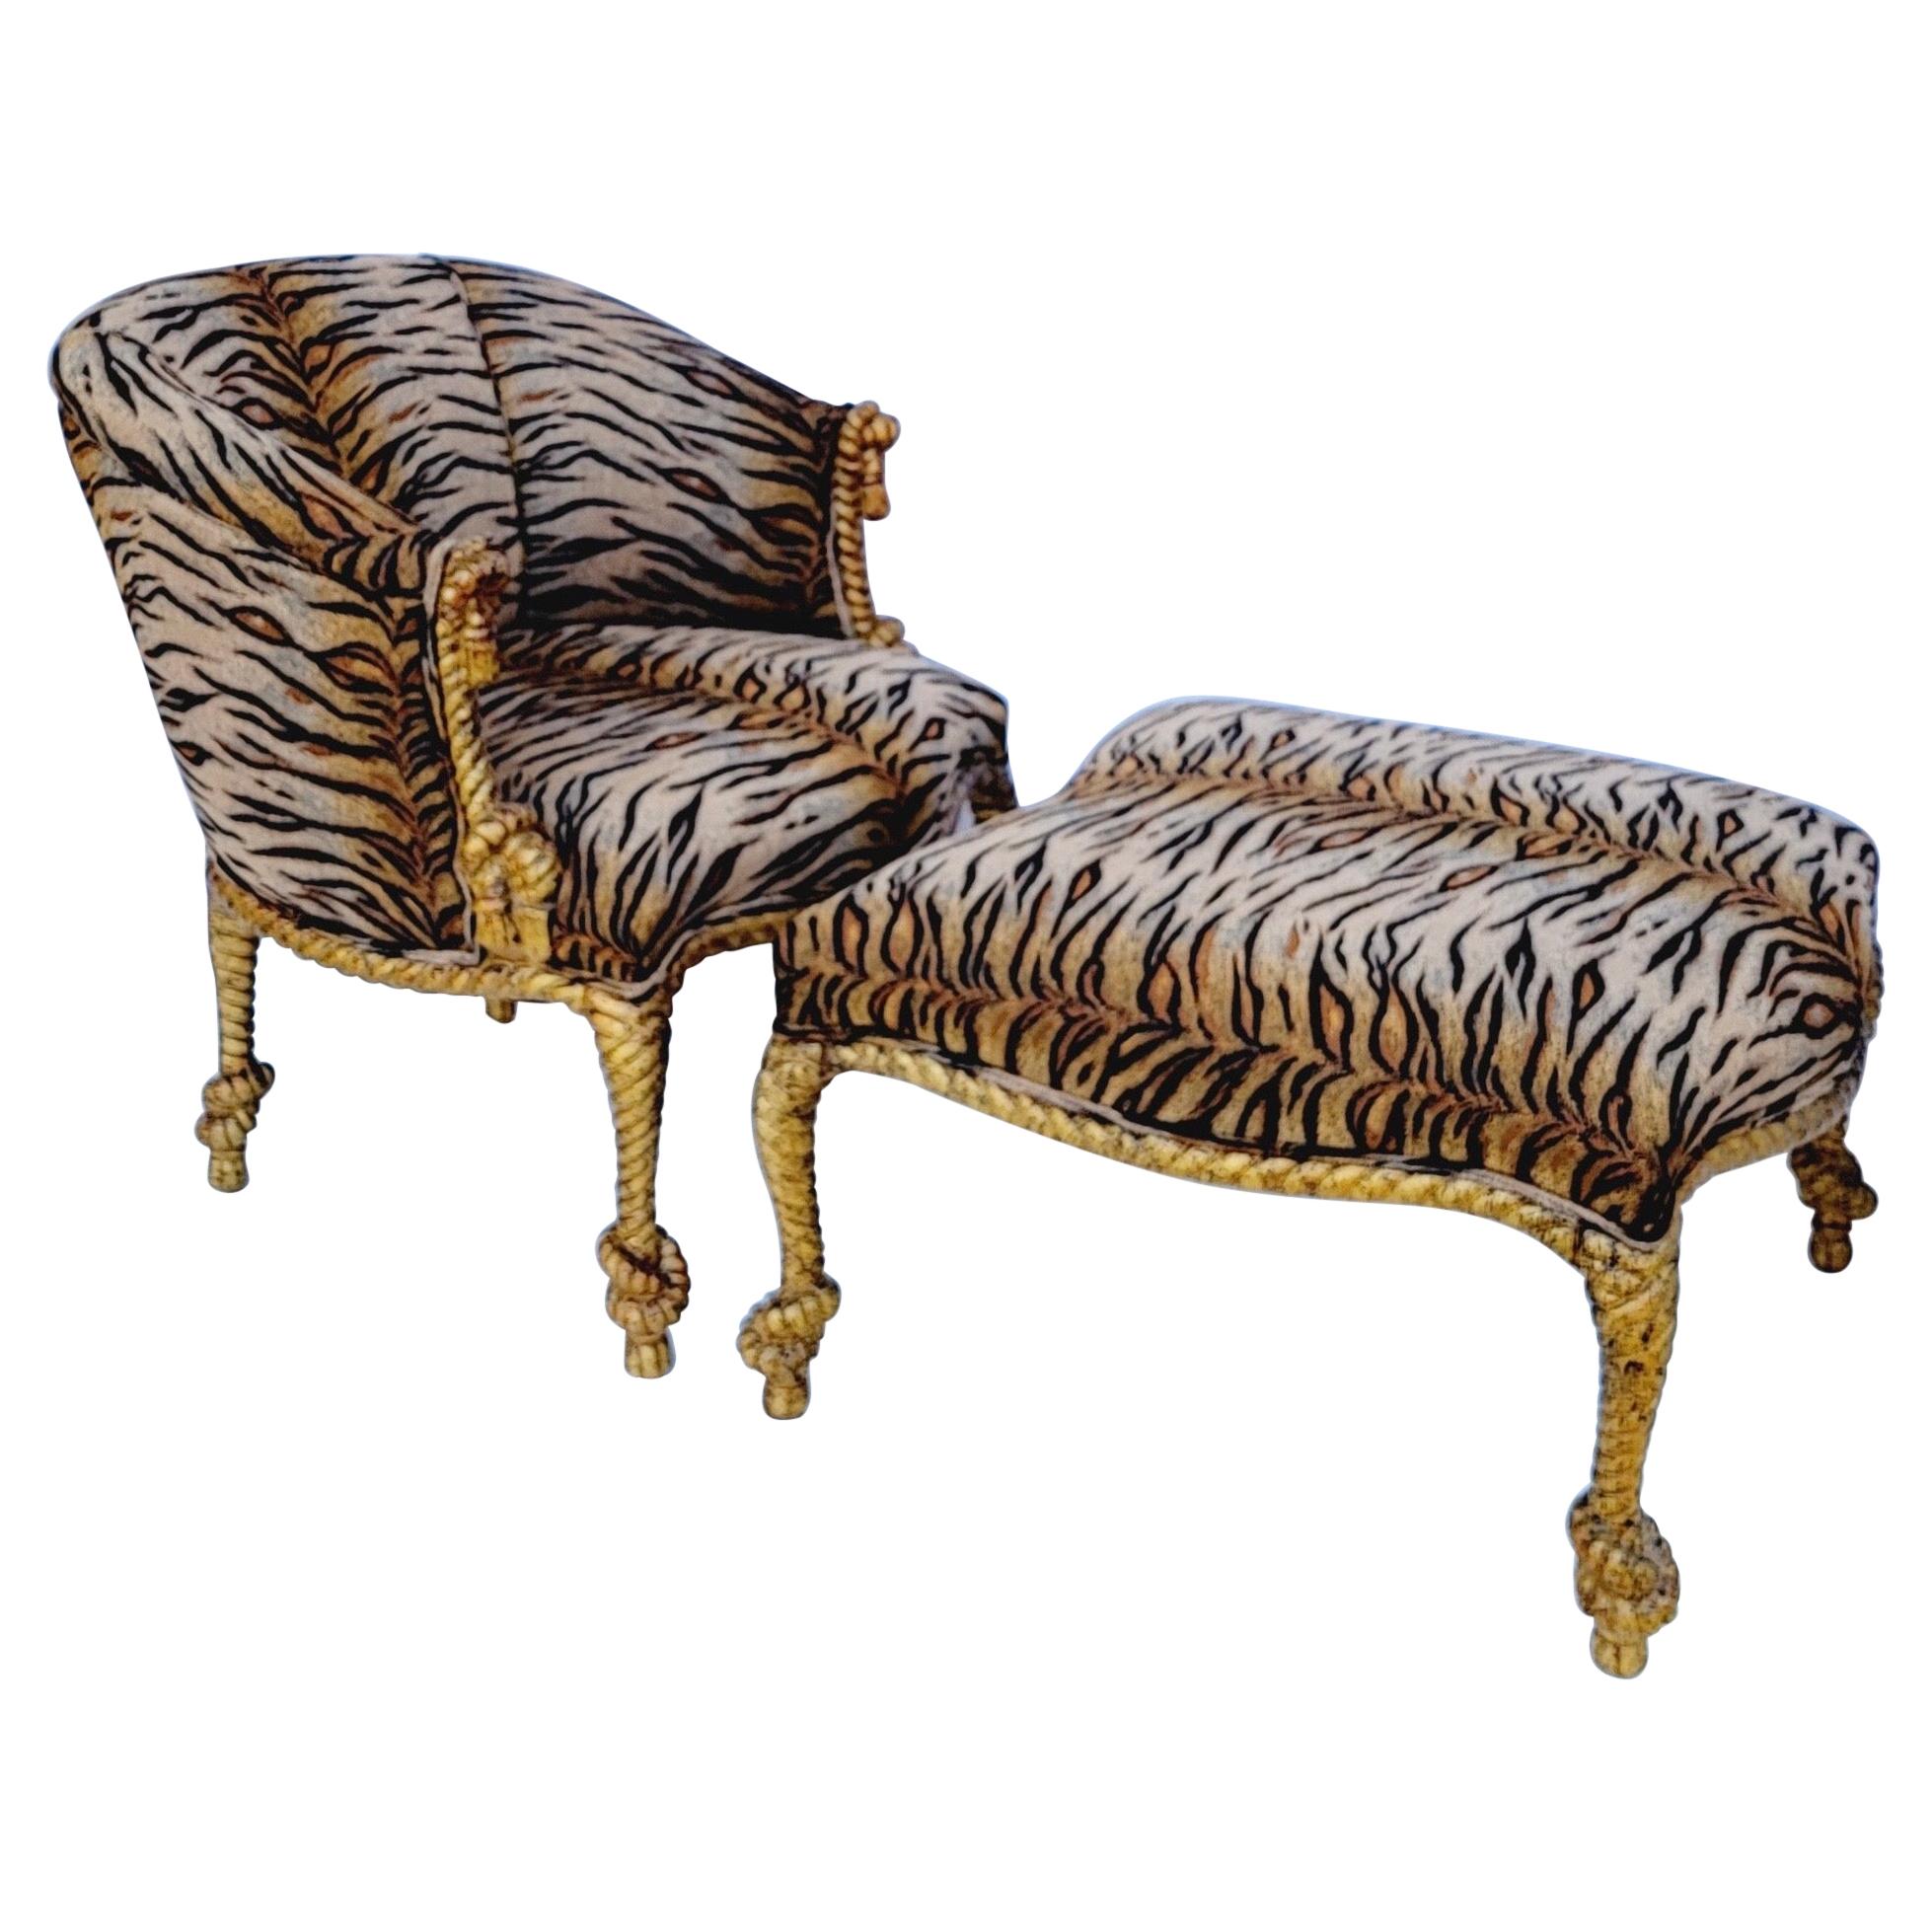 Regency Style Carved Giltwood Italian Rope Chair and Ottoman